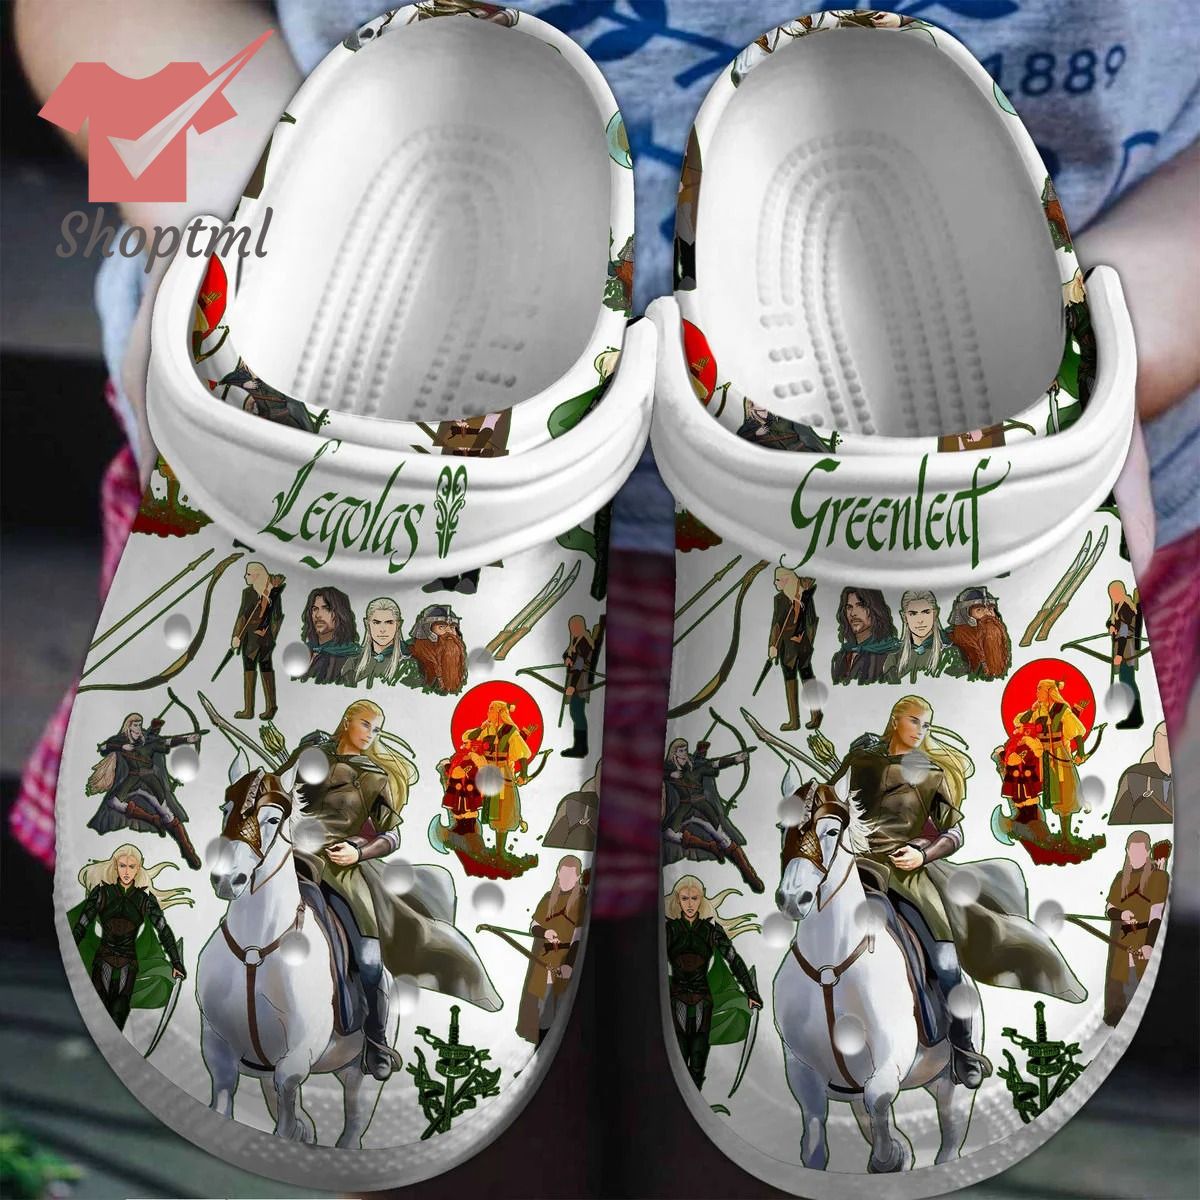 The Lord of the Rings crocs